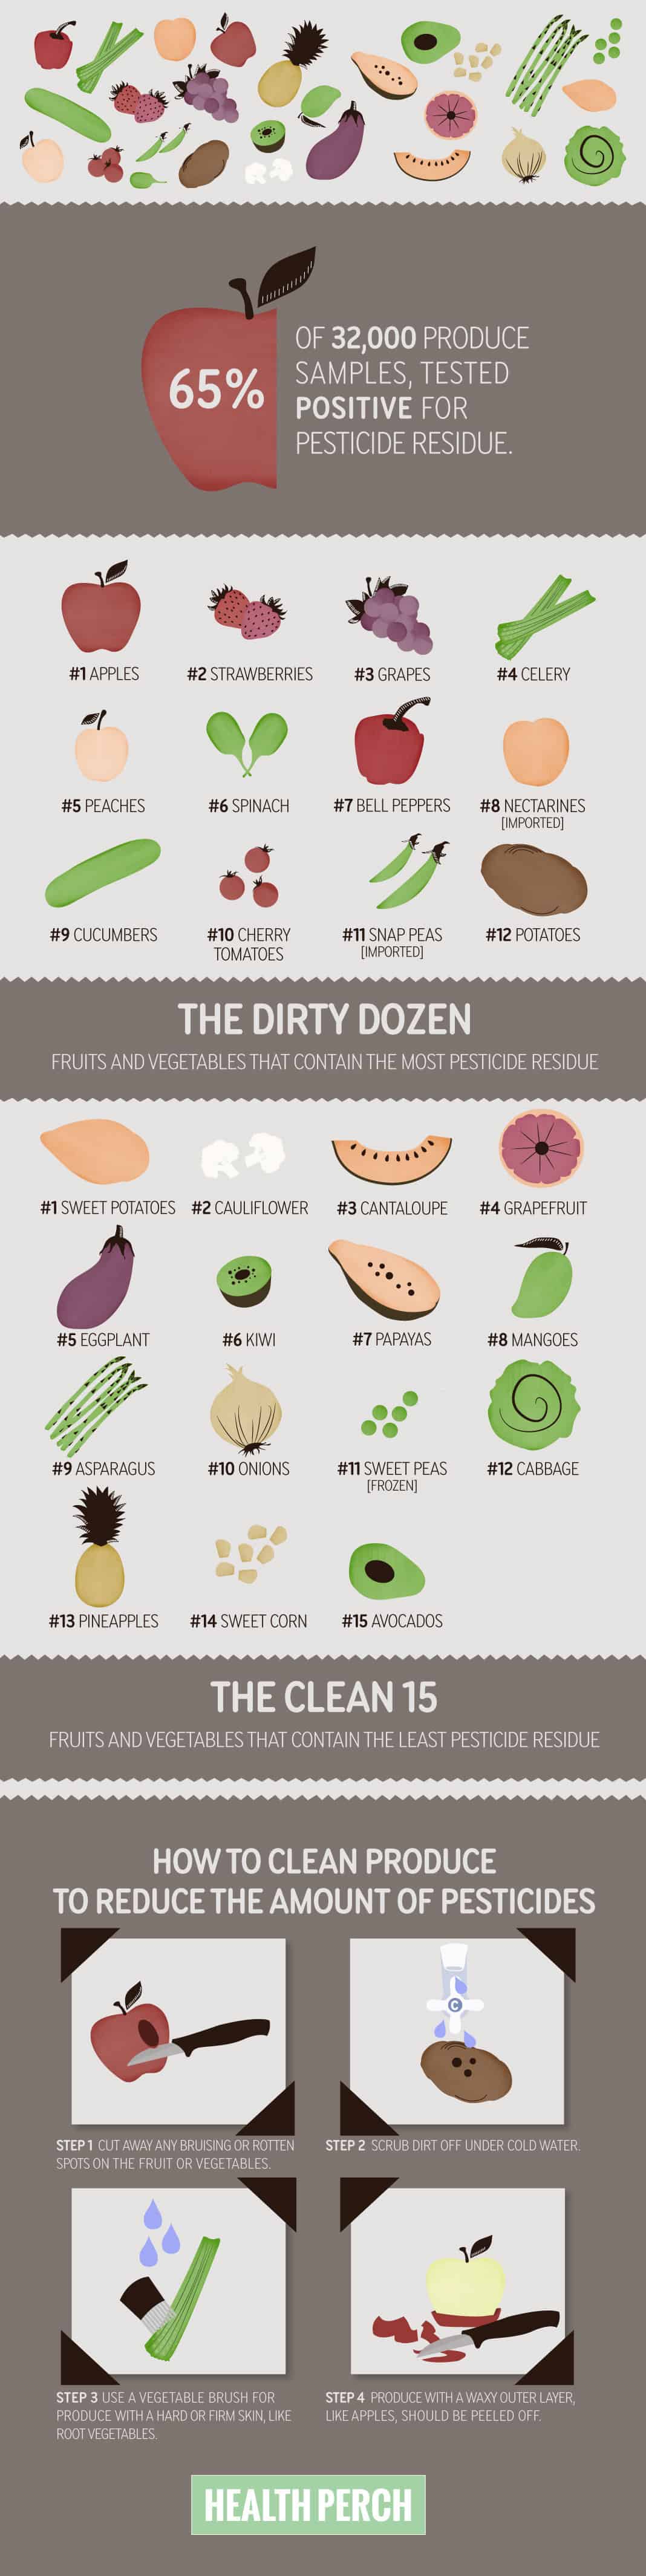 Pesticides & Produce - A Look at 2014's Dirty Dozen and Clean 15